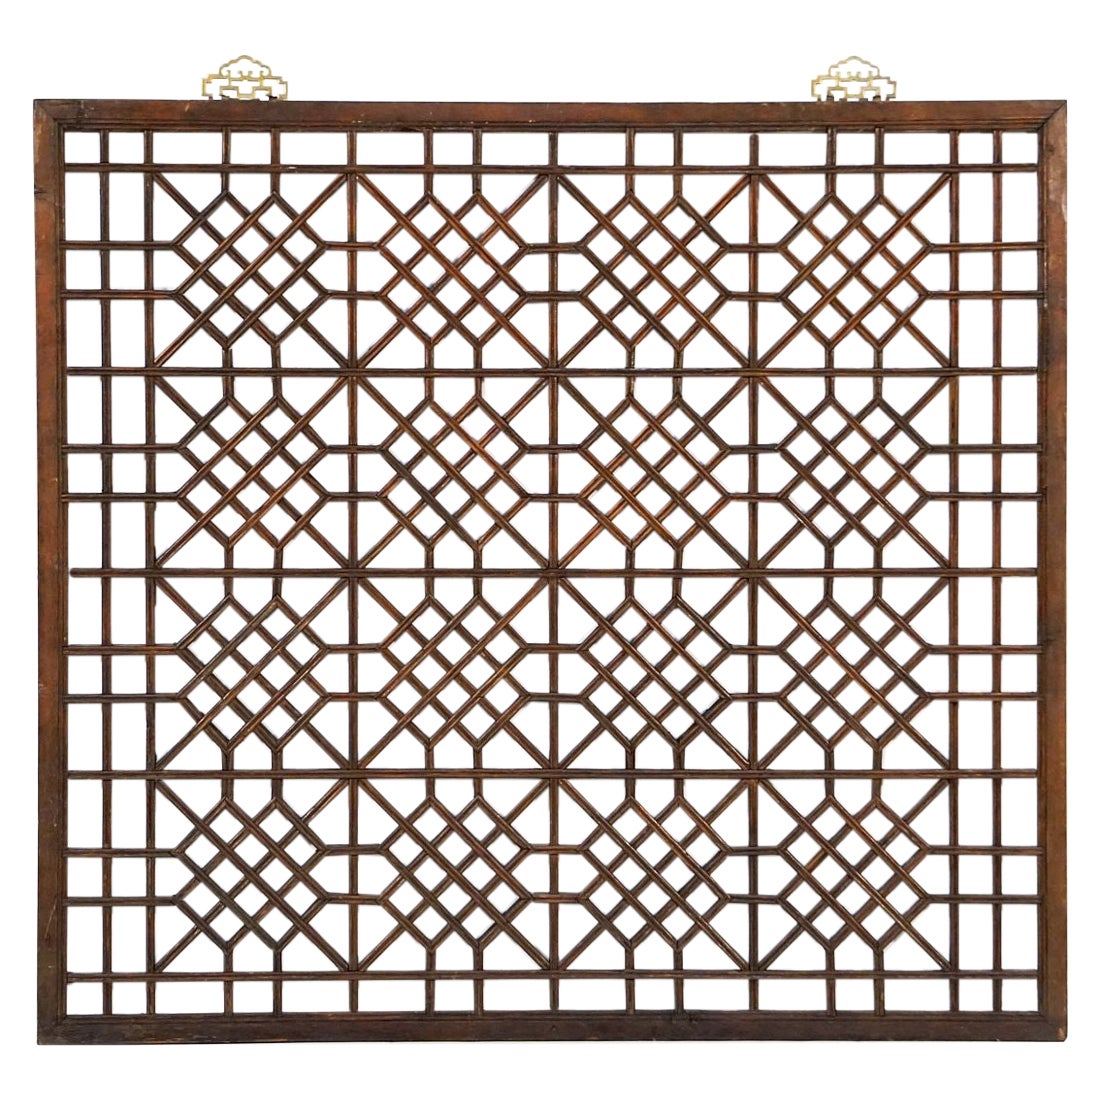 Chinese Decorative Lattice Wood Panels or Window Screens - Sold as a Set